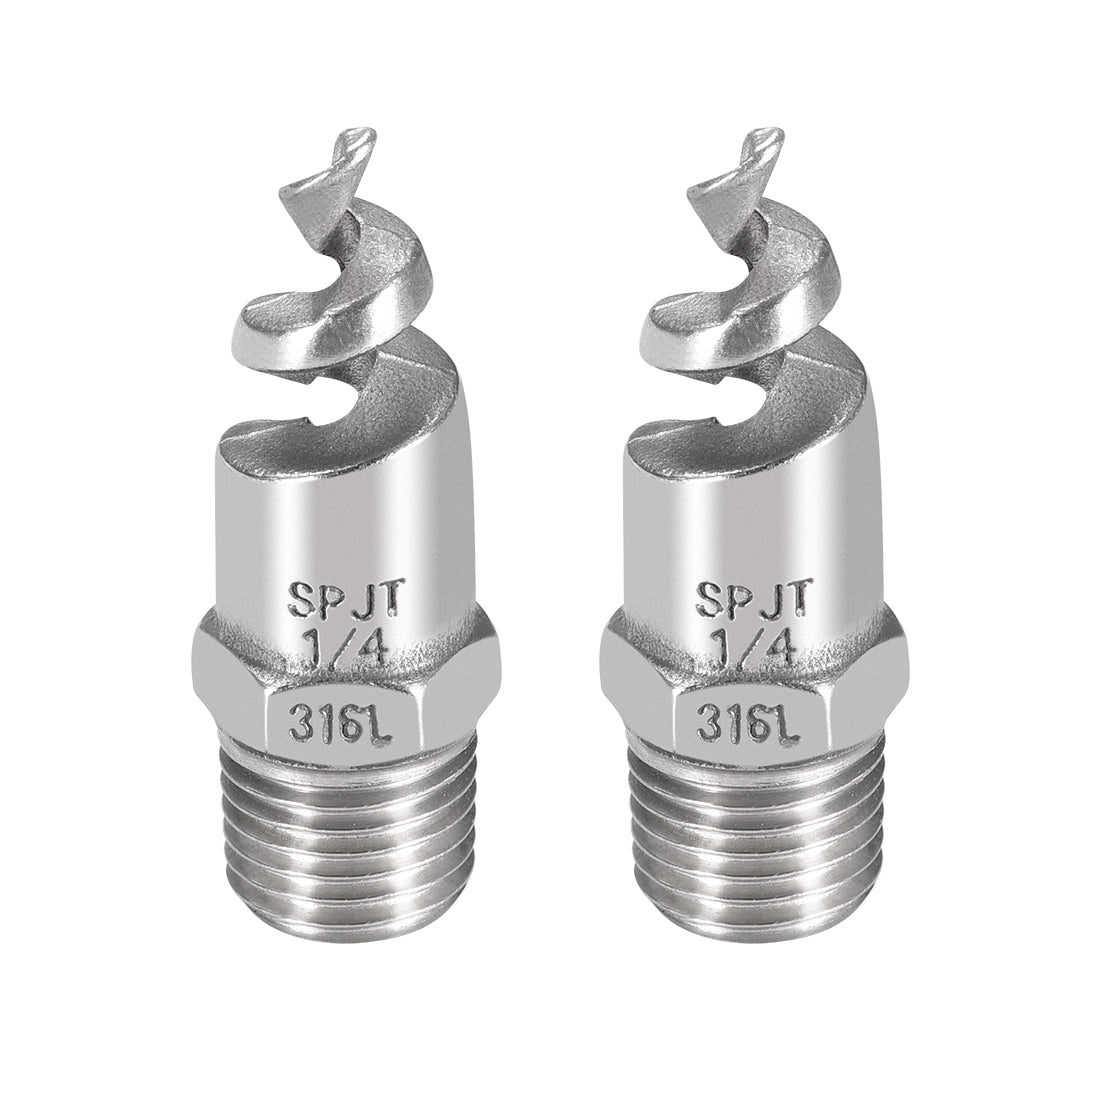 uxcell Uxcell Spiral Cone Atomization Nozzle, 1/4BSPT 316 Stainless Steel Sprinkler, 2 Pcs (Bright Silver)